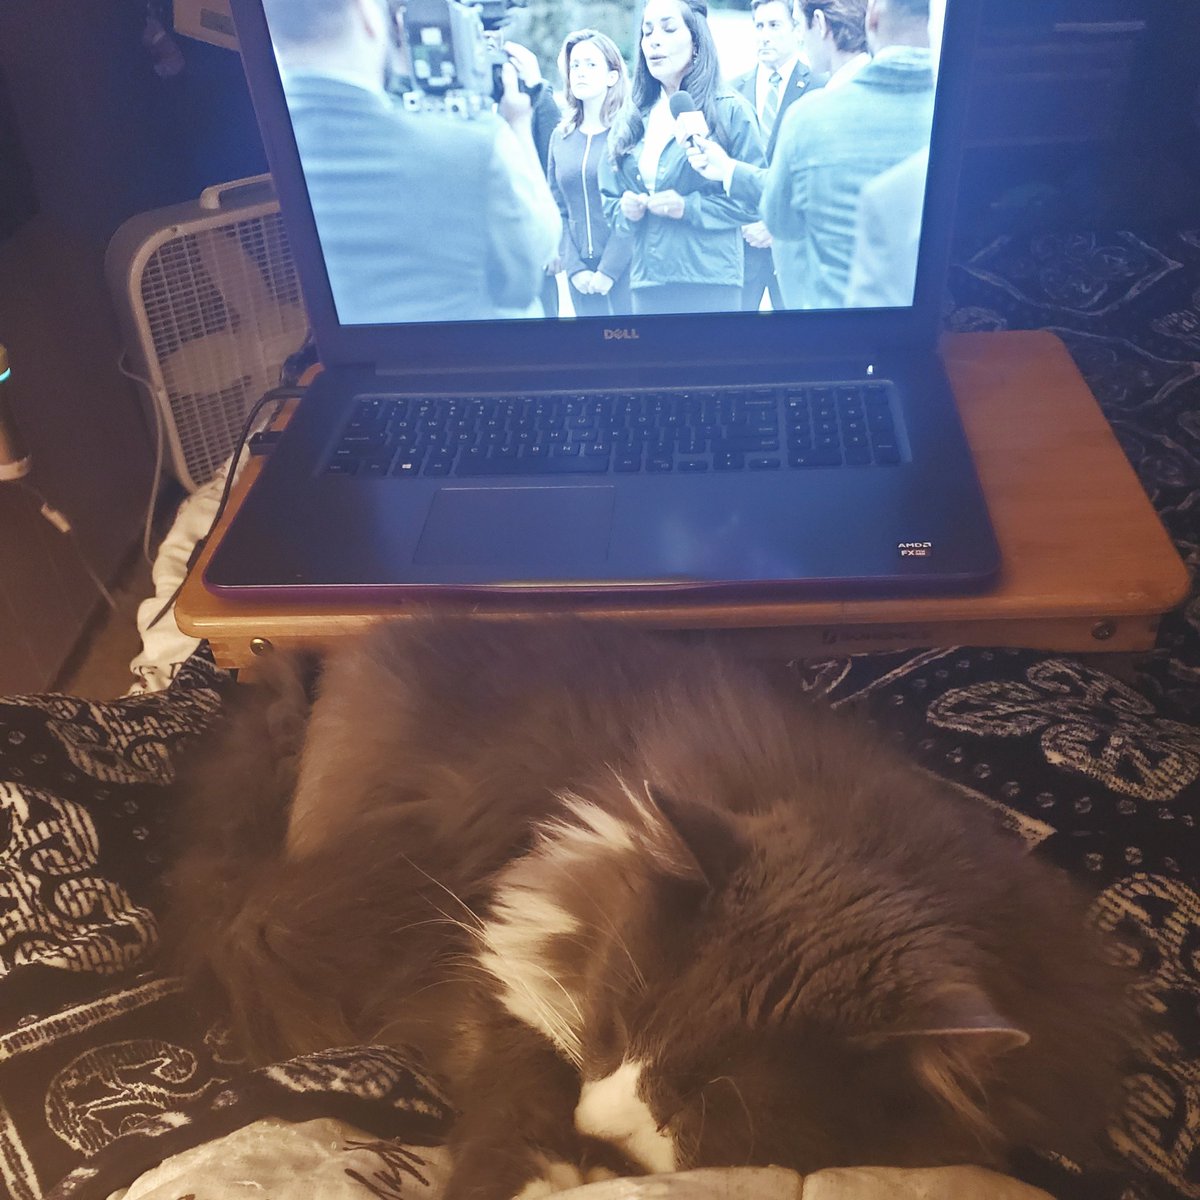 New found happy place 🥰
It's snuggles from #hannibalthecat and #Instinct for a relaxing afternoon